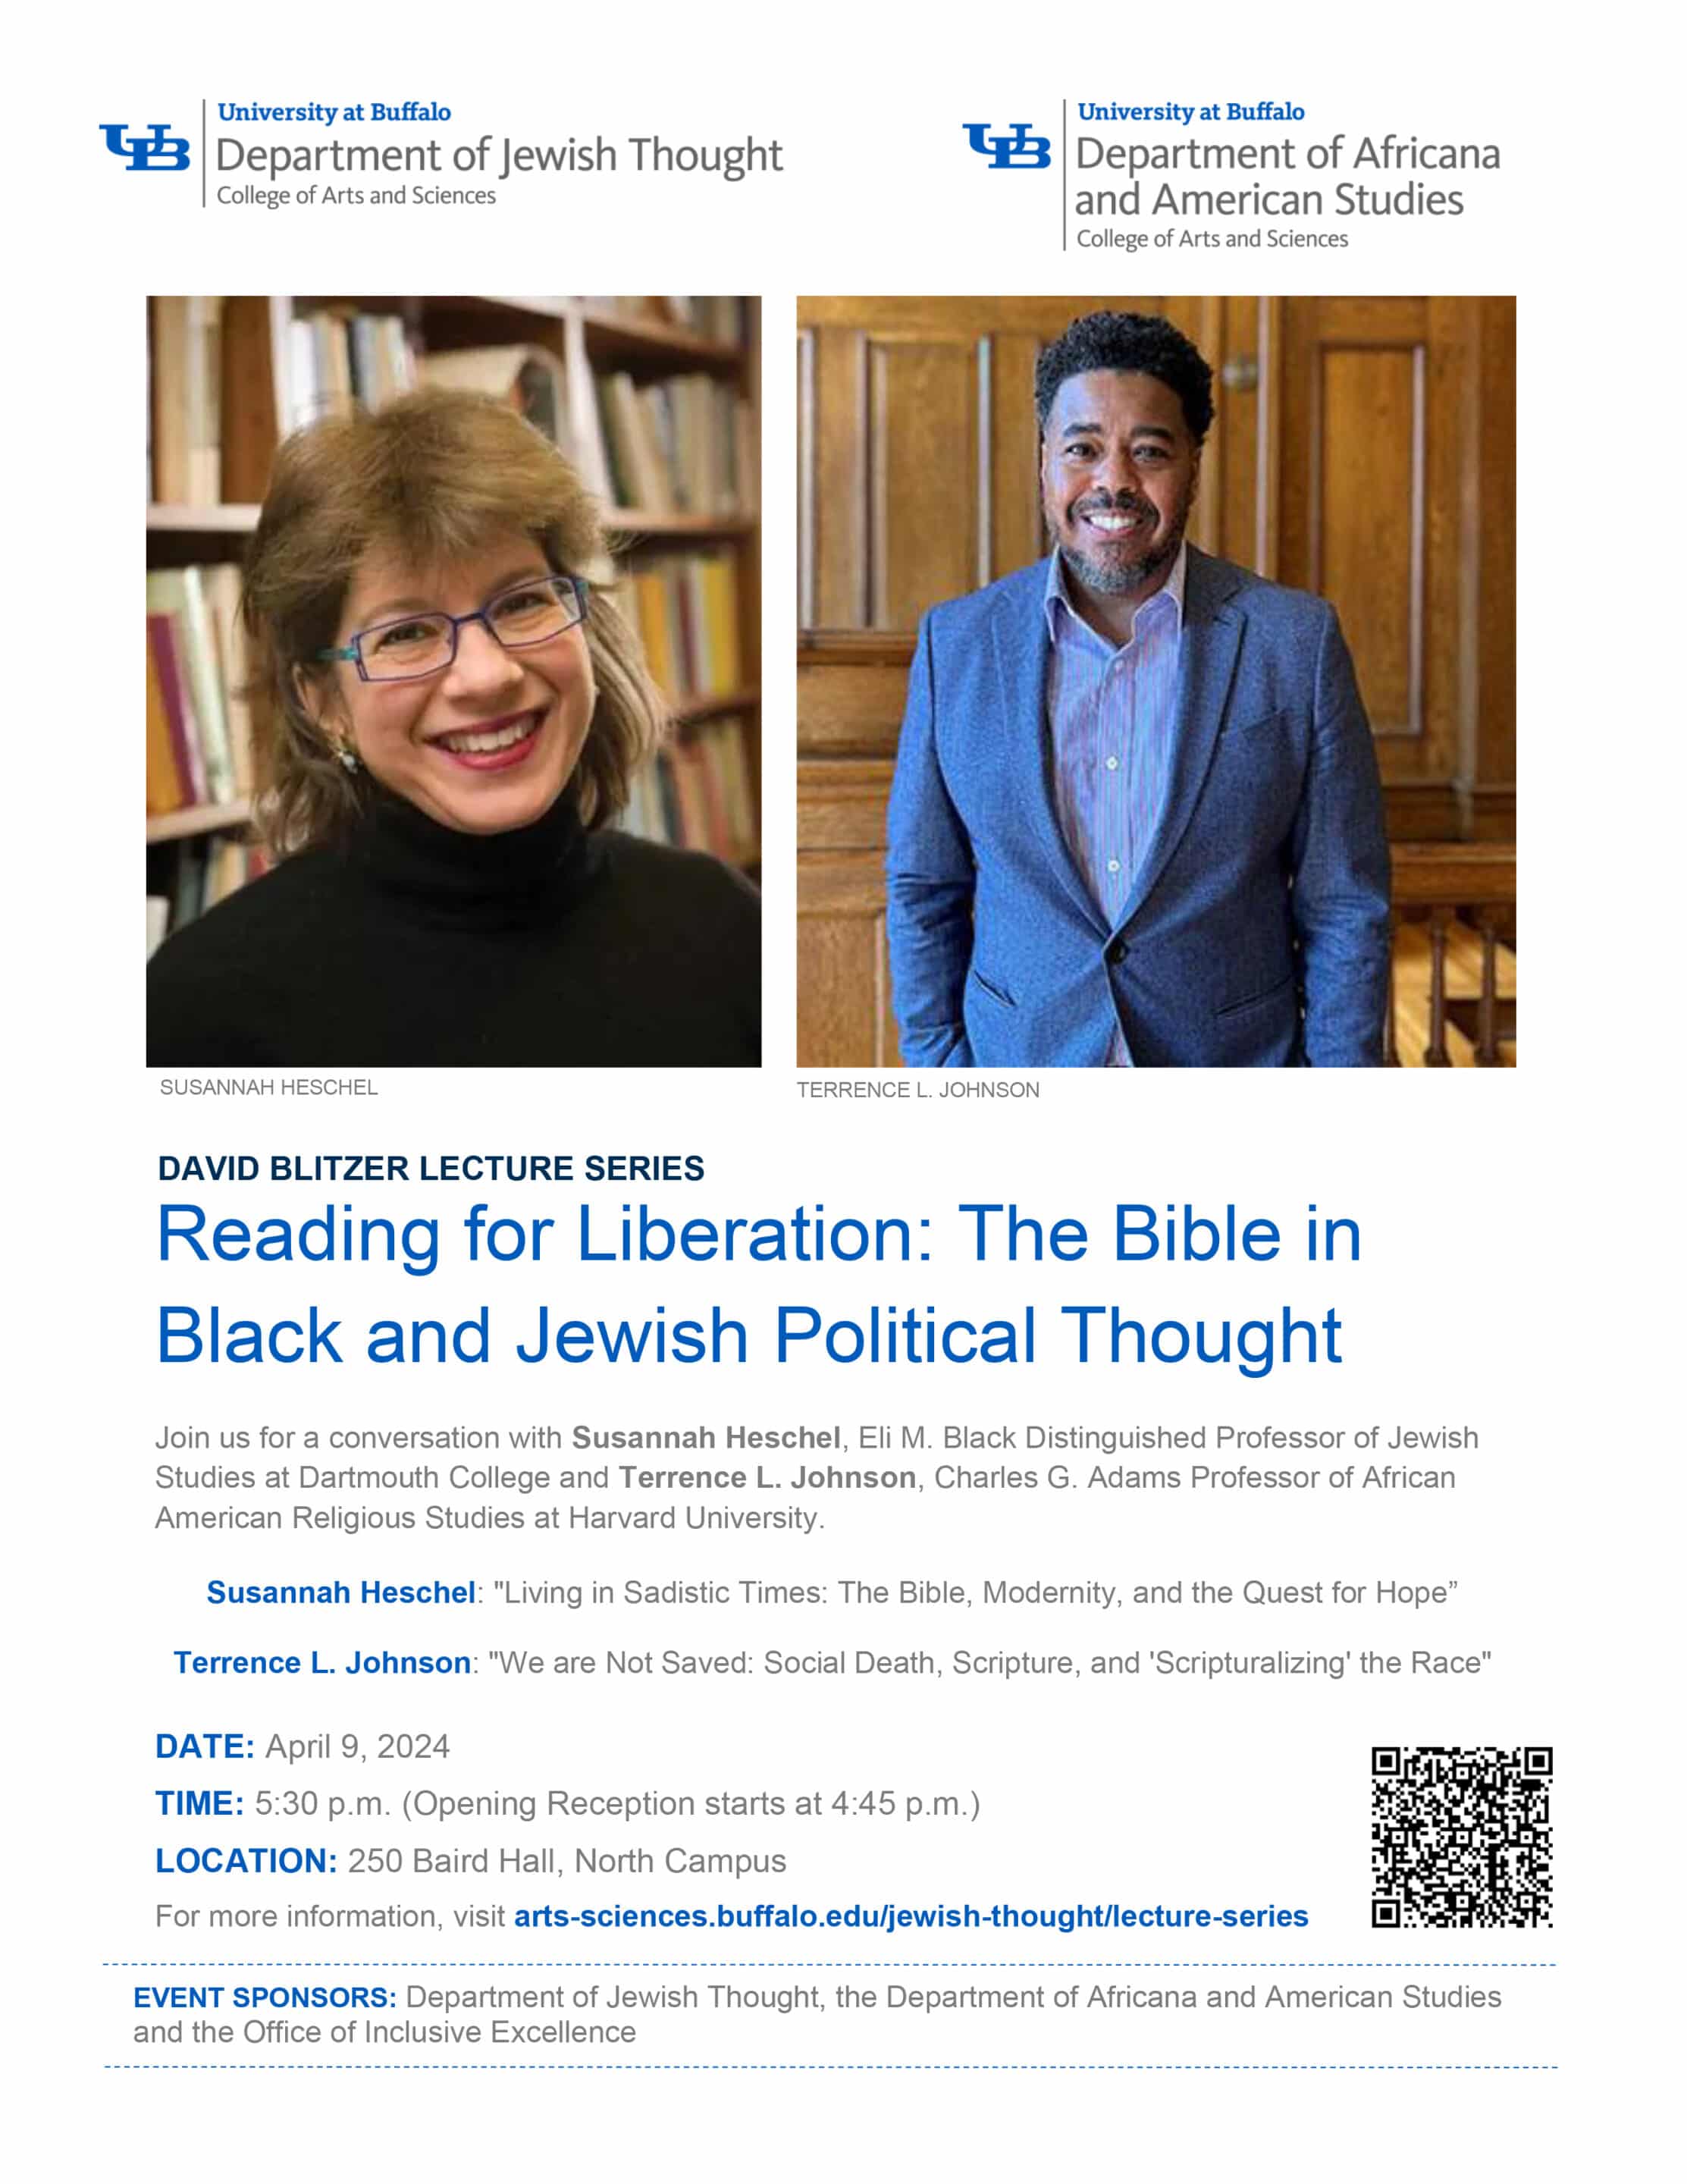 David Blitzer Lecture: Reading for Liberation: The Bible in Black and Jewish Political Thought - Hechel Johnson Event Poster scaled